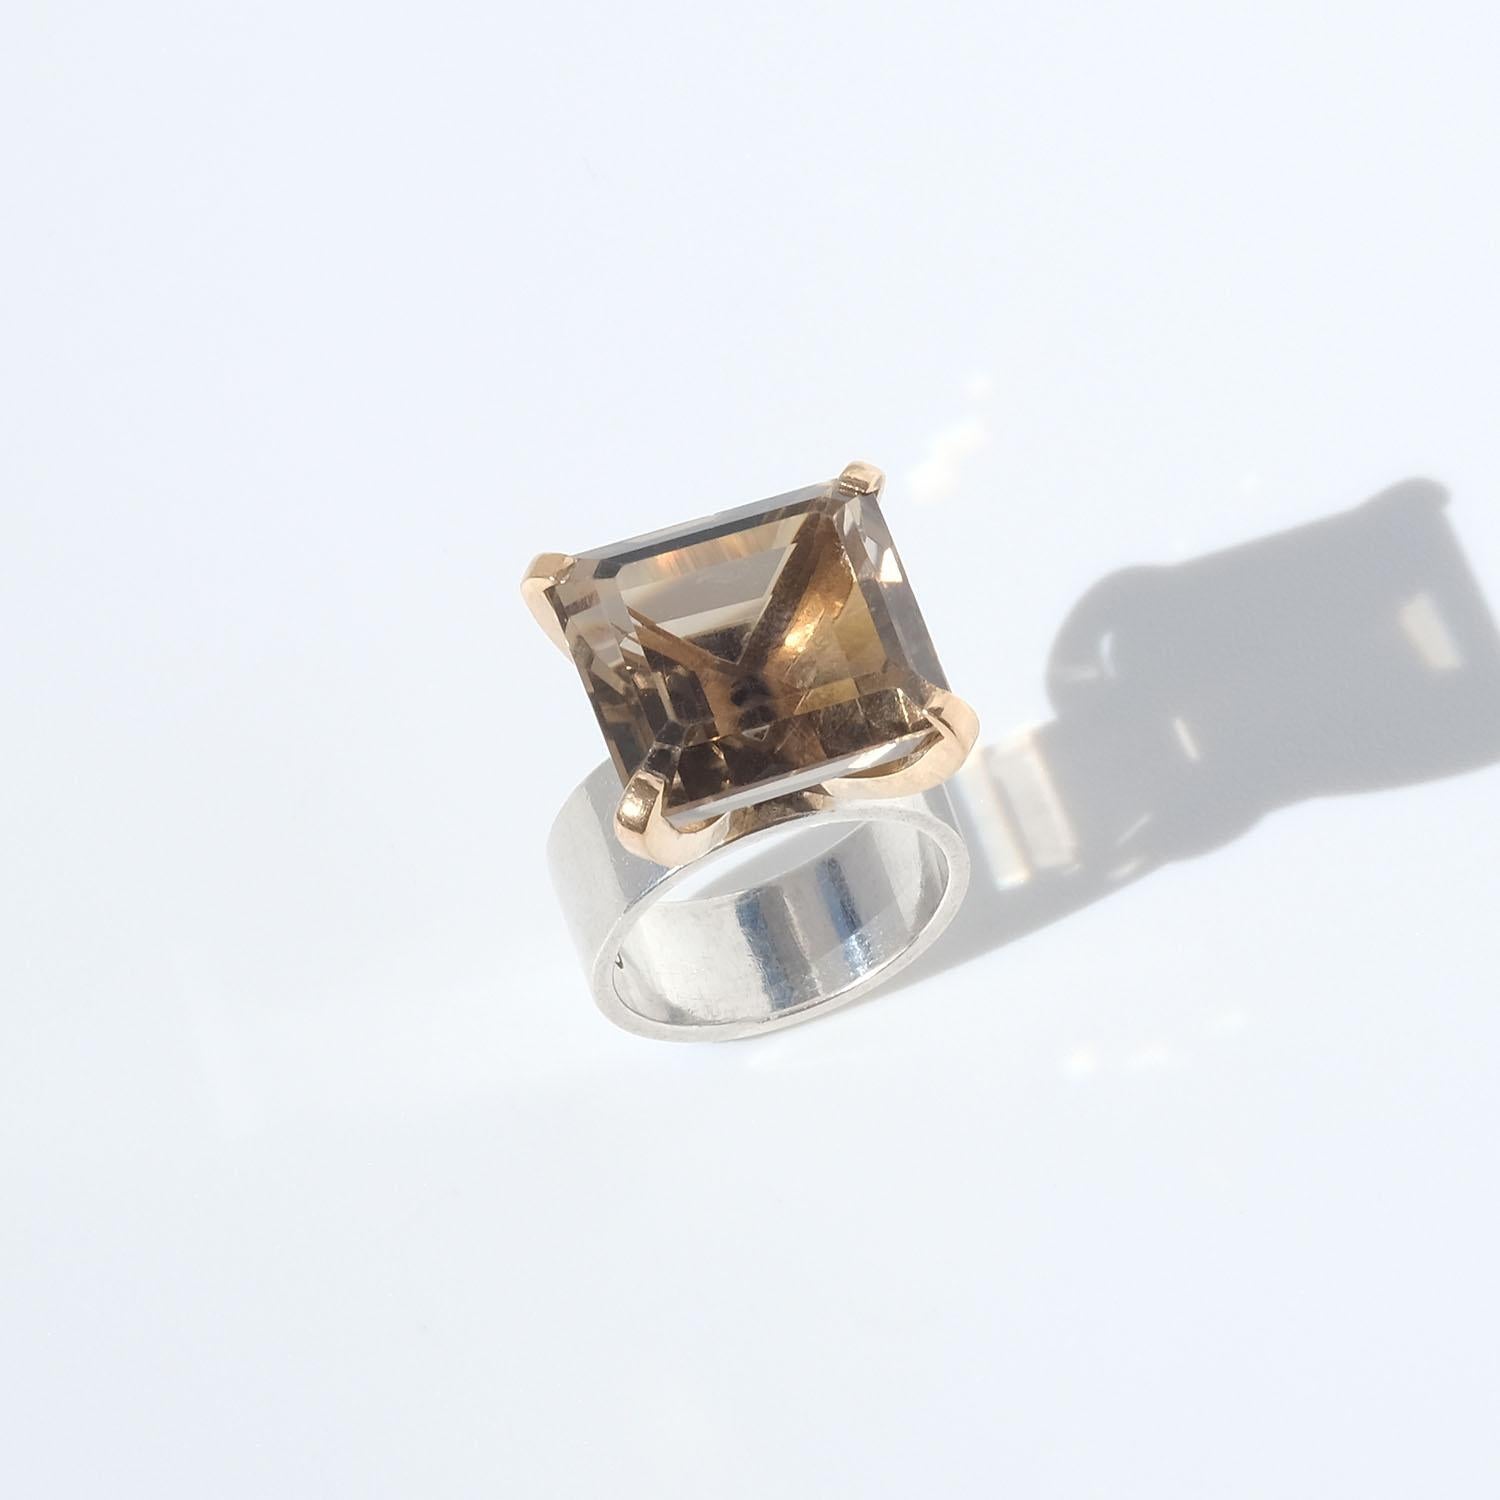 Square Cut Silver and 18k Gold Smoky Quartz Ring Made Year 2000 For Sale